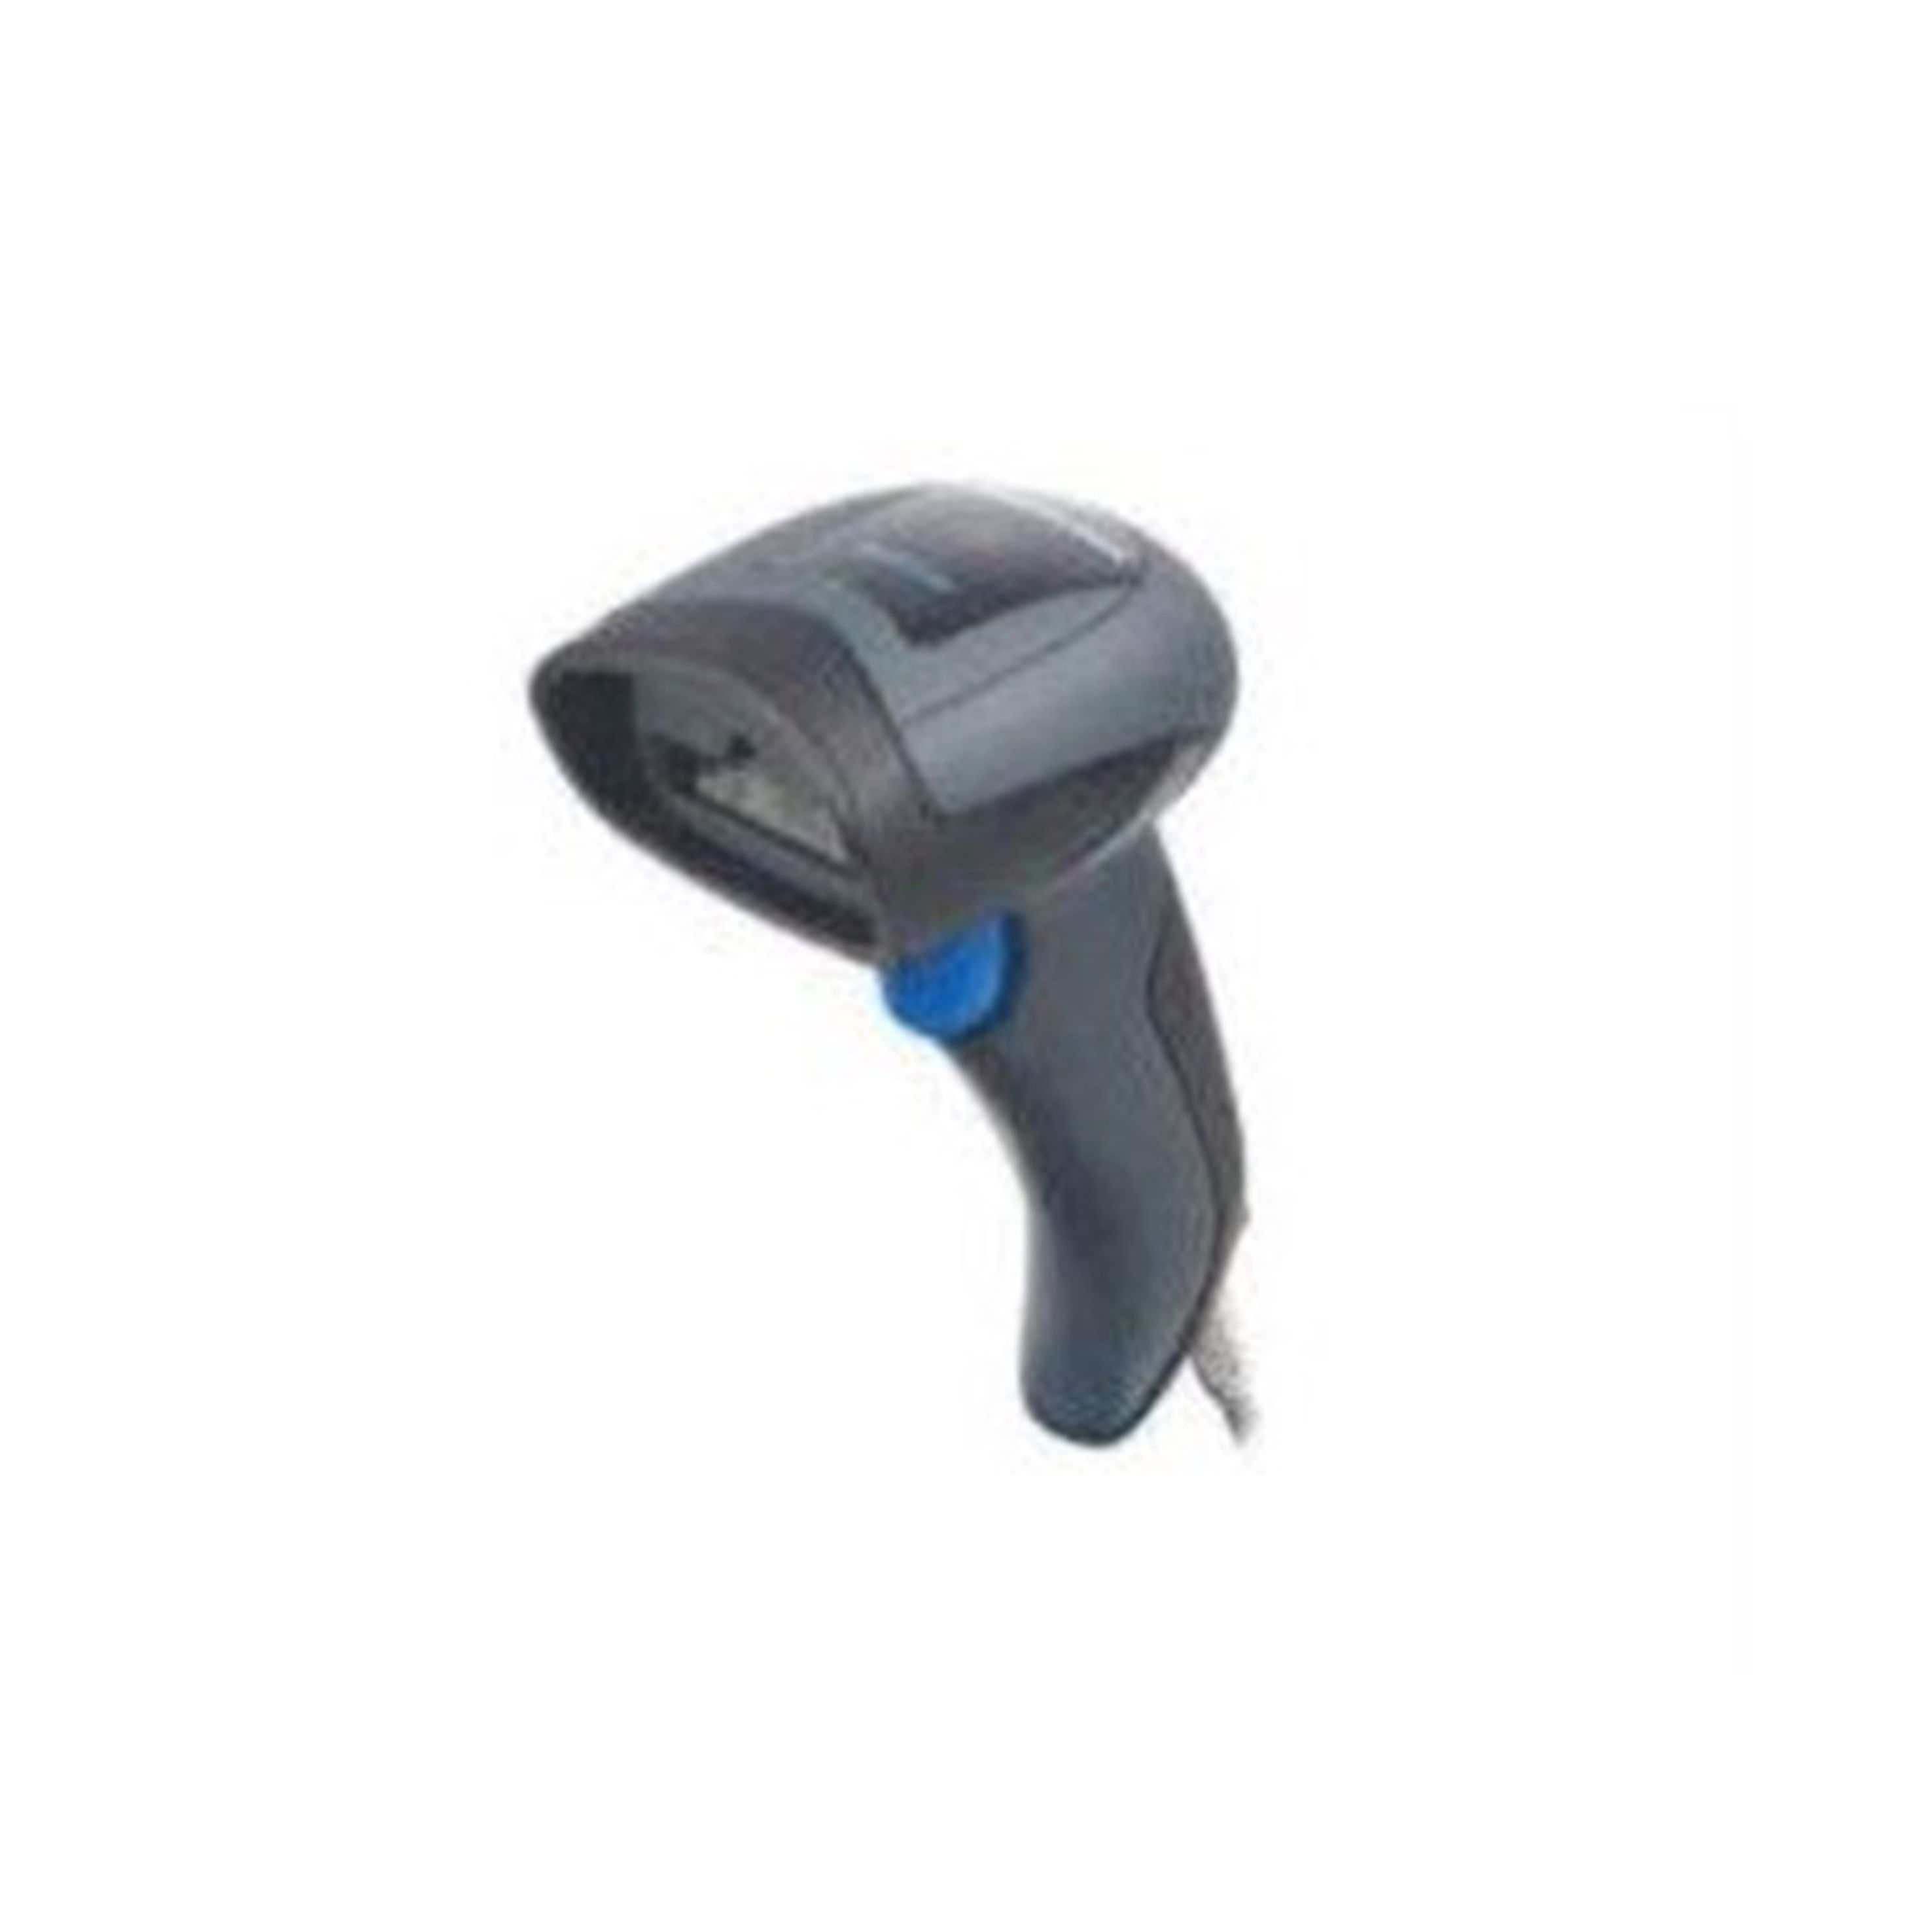 Roche 6541143001 MagNA Pure 96 Barcode Scanner